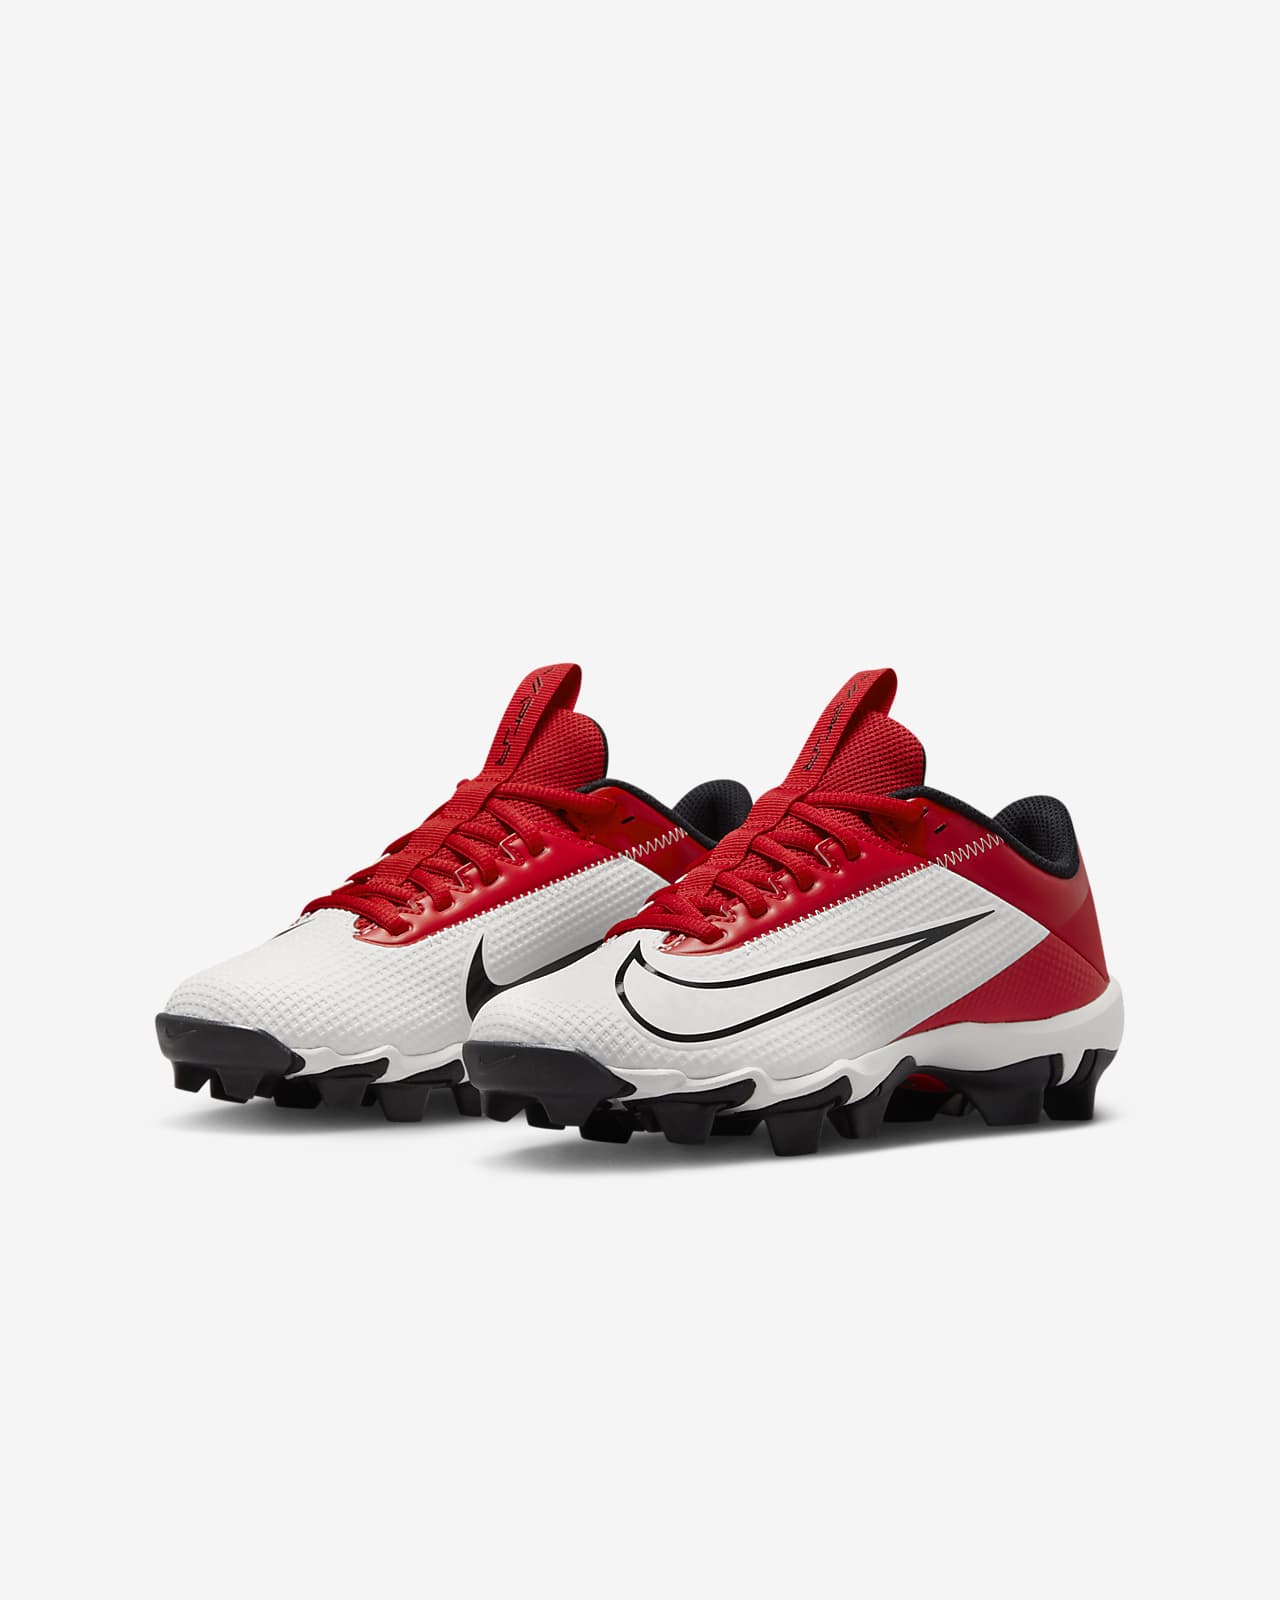 Nike Off-White High Youth Football Cleats 3.5Y / Red